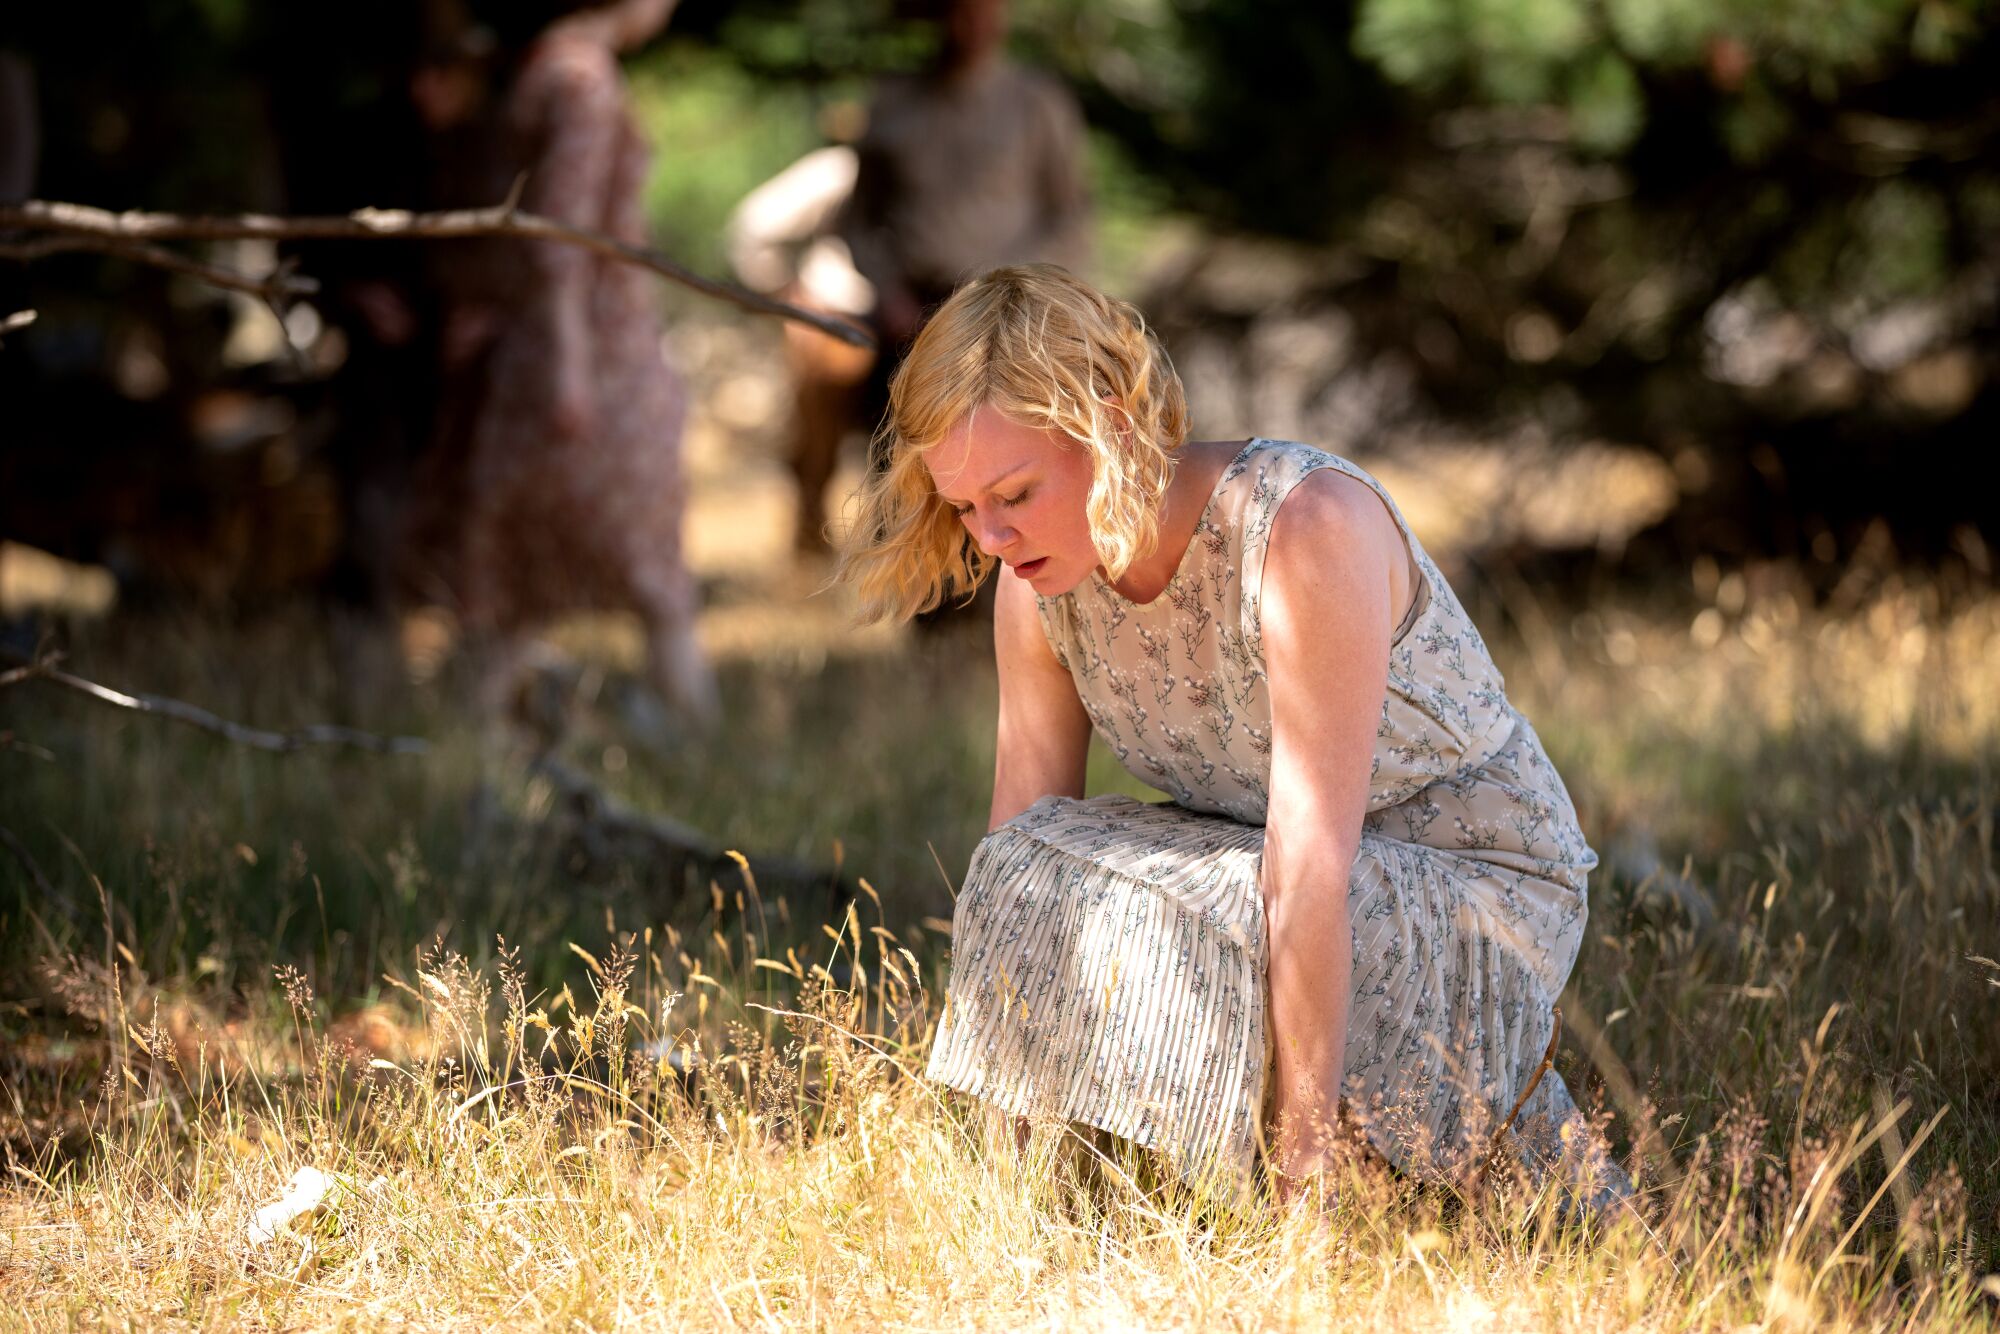 A woman in a floral dress crouches down in grass.